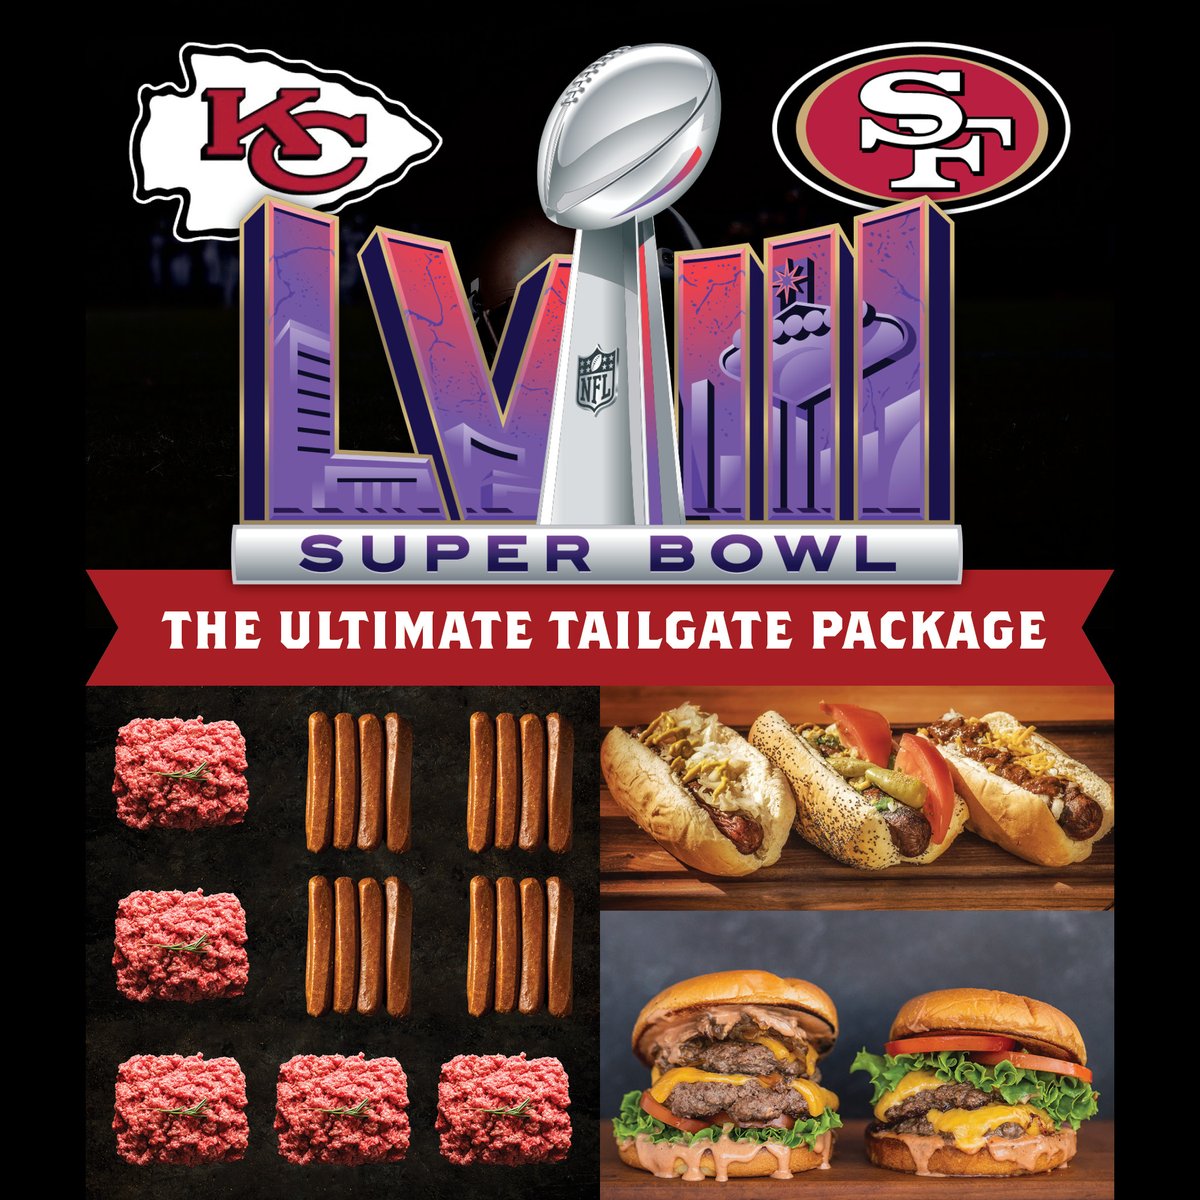 The perfect combo for Super Bowl Sunday! Receive five 1lb bricks of our perfectly blended ground beef and four packages of our USDA All Beef Hot Dogs. Super Bowl Sunday made easier, order yours now! Order by February 6th. #e3meatco #e3ranch #morethanasteak #responsiblyraised